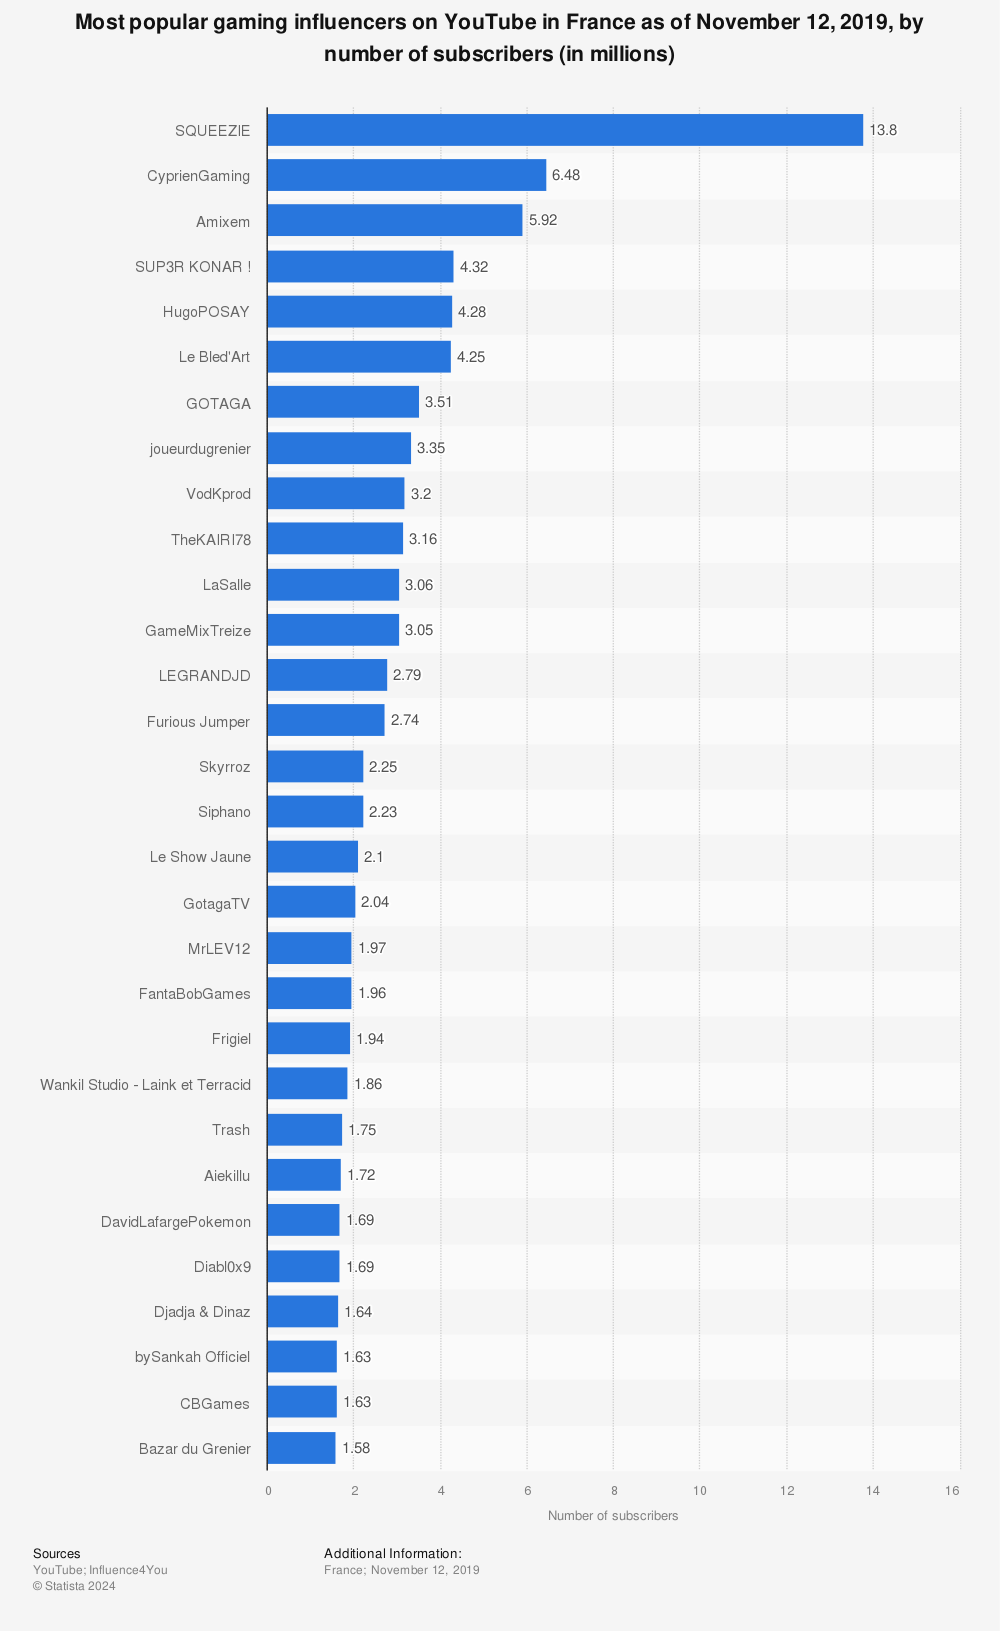 Statistic: Most popular gaming influencers on YouTube in France as of November 12, 2019, by number of subscribers (in millions) | Statista